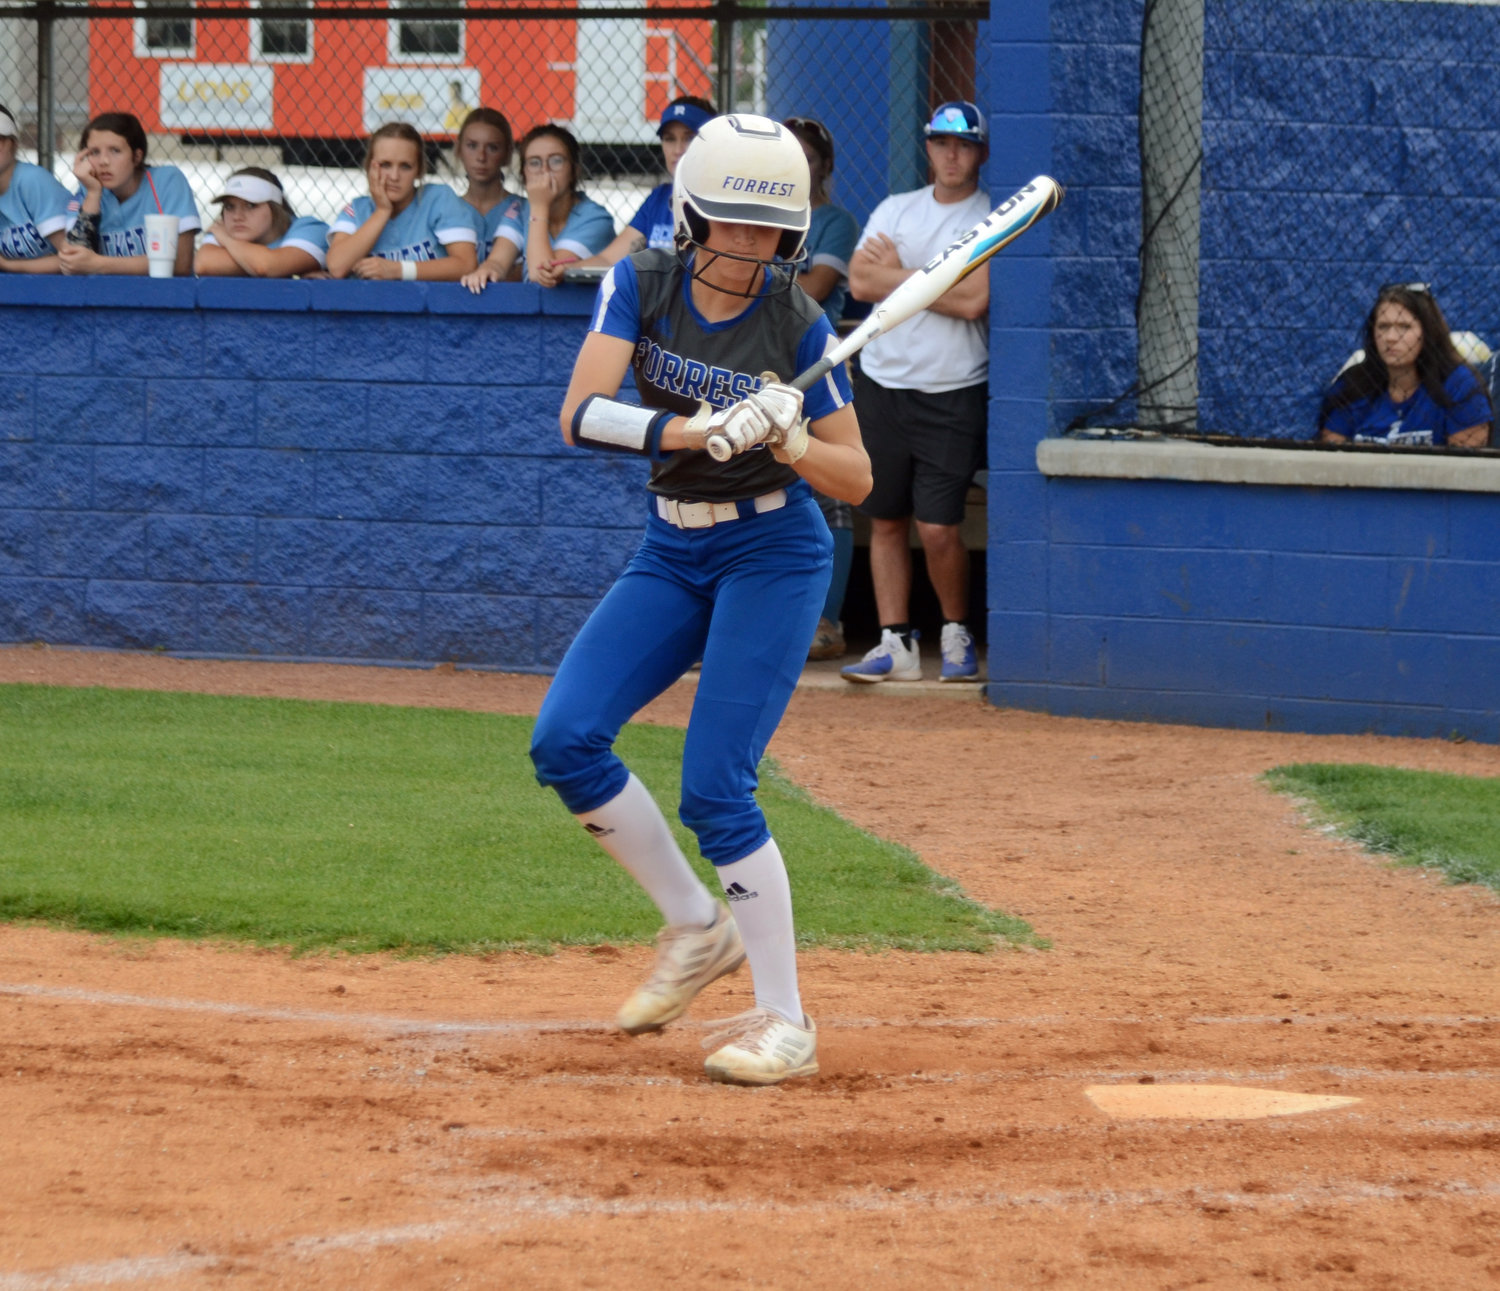 Maggie Daughrity went 2-for-2 with two runs scored and an RBI.